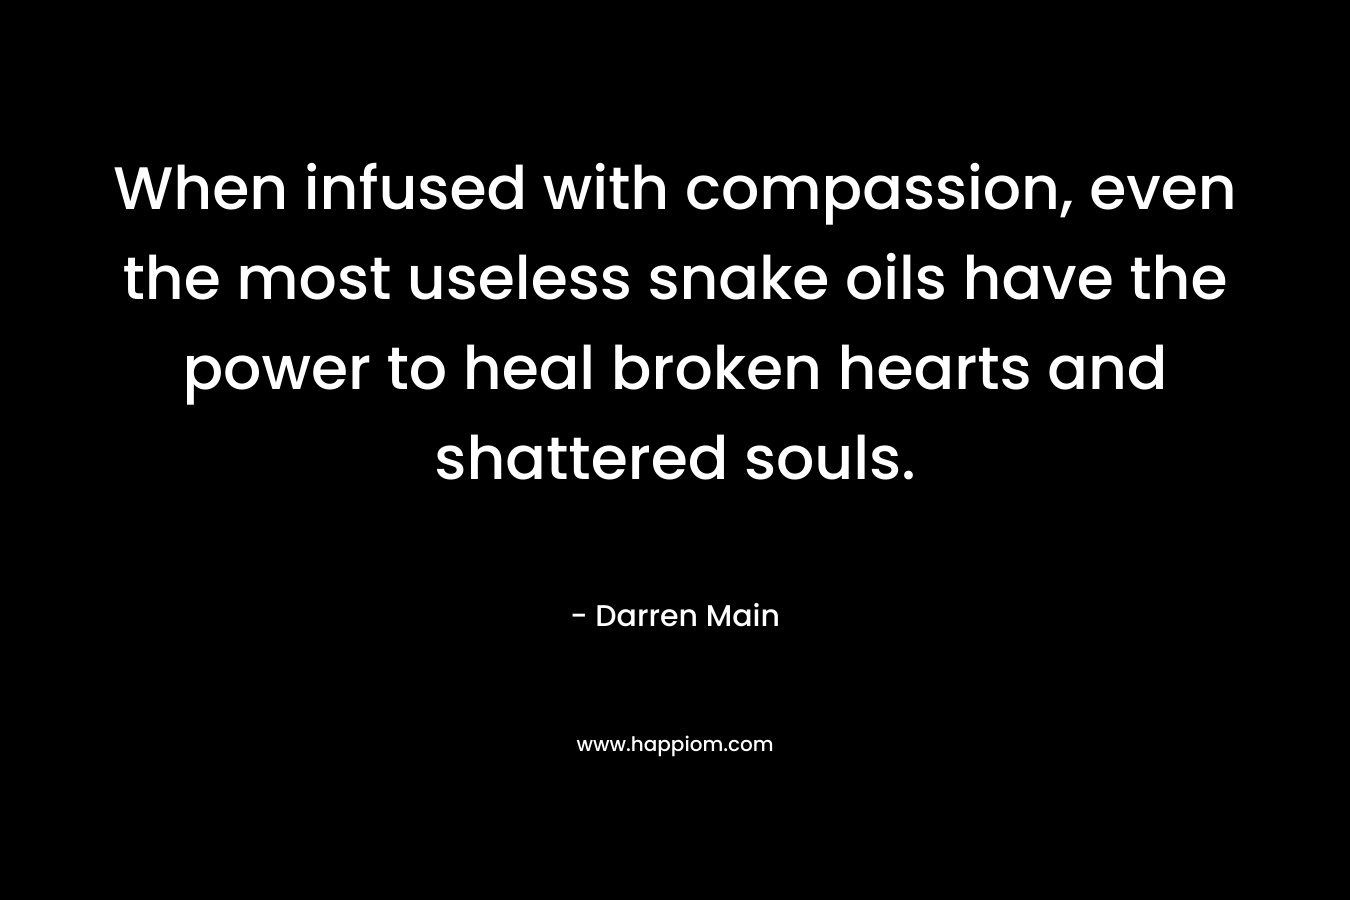 When infused with compassion, even the most useless snake oils have the power to heal broken hearts and shattered souls.